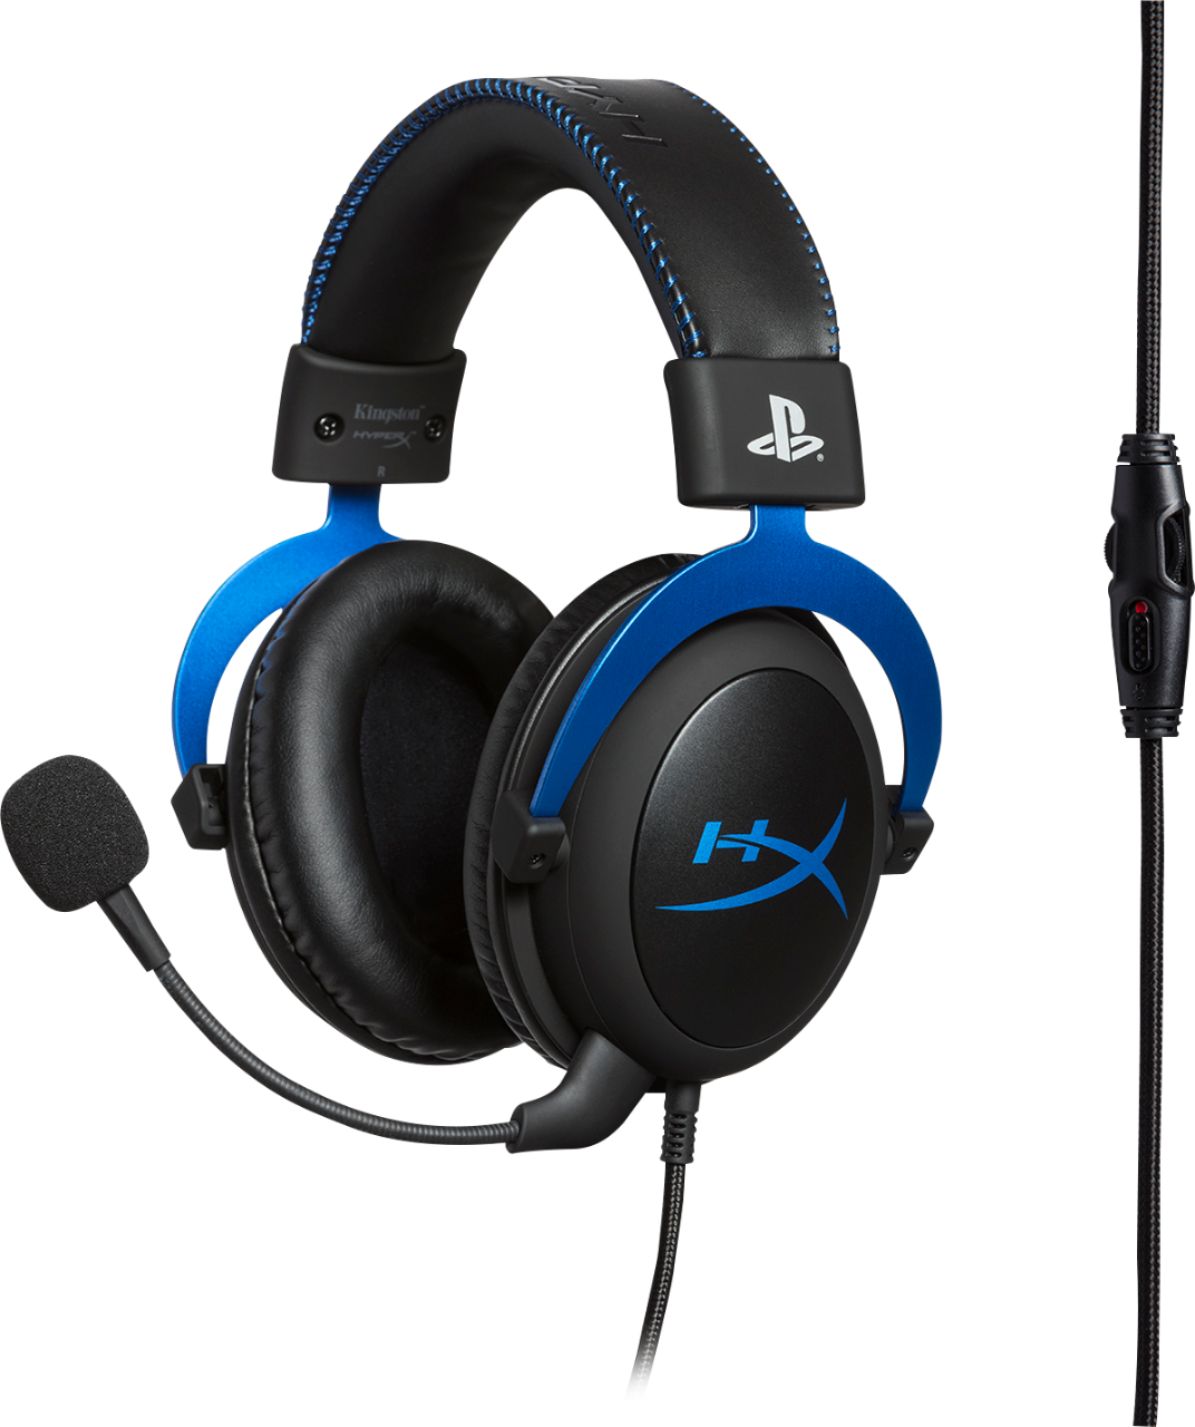 mic for ps4 headset